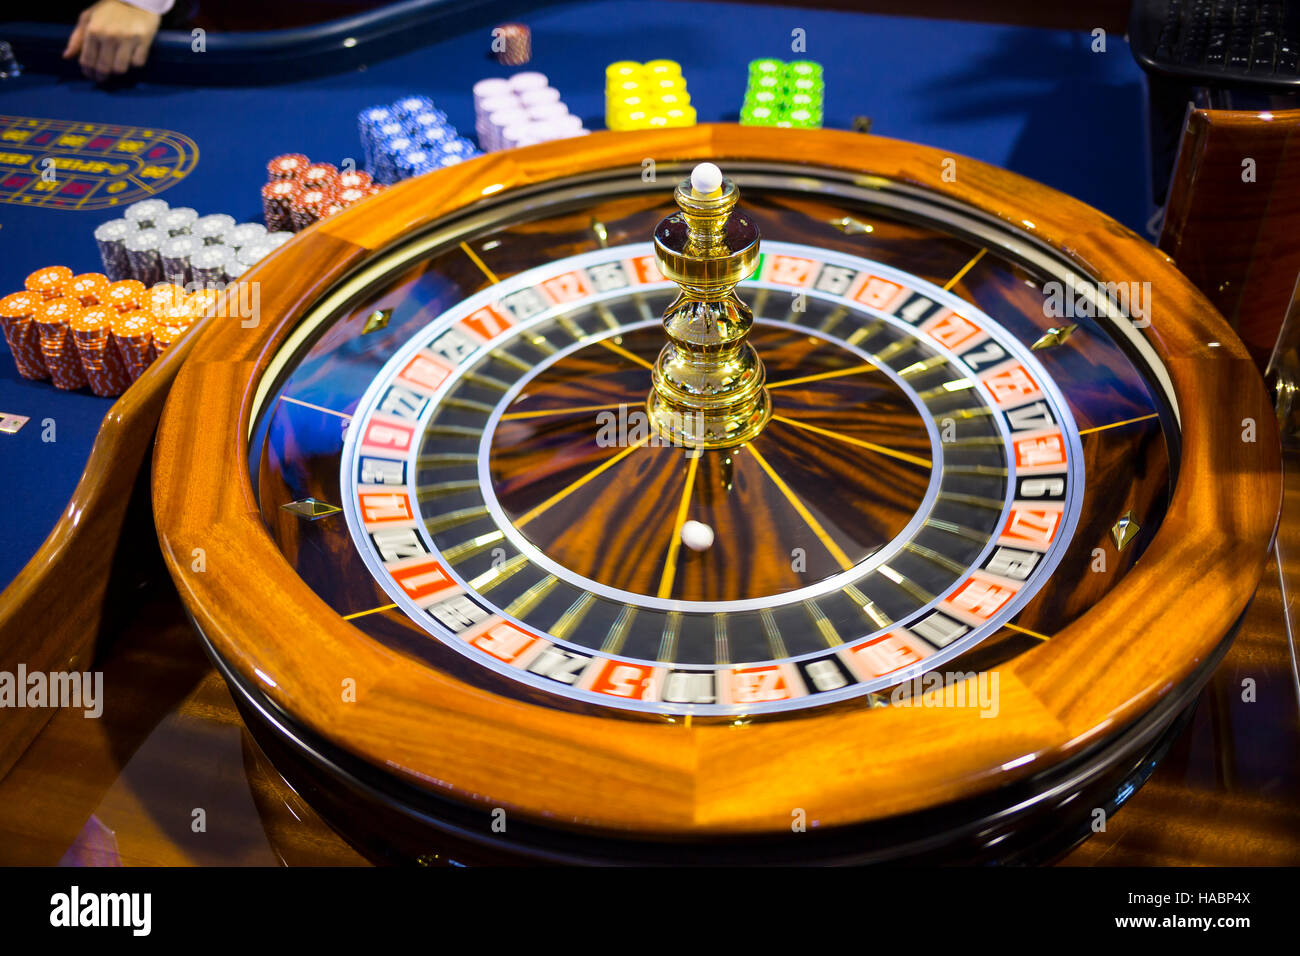 Wooden colourful casino roulette. Casino machine and gambling equipment. Roulette table with chips next to the roulette. Spinning roulette in motion. Stock Photo